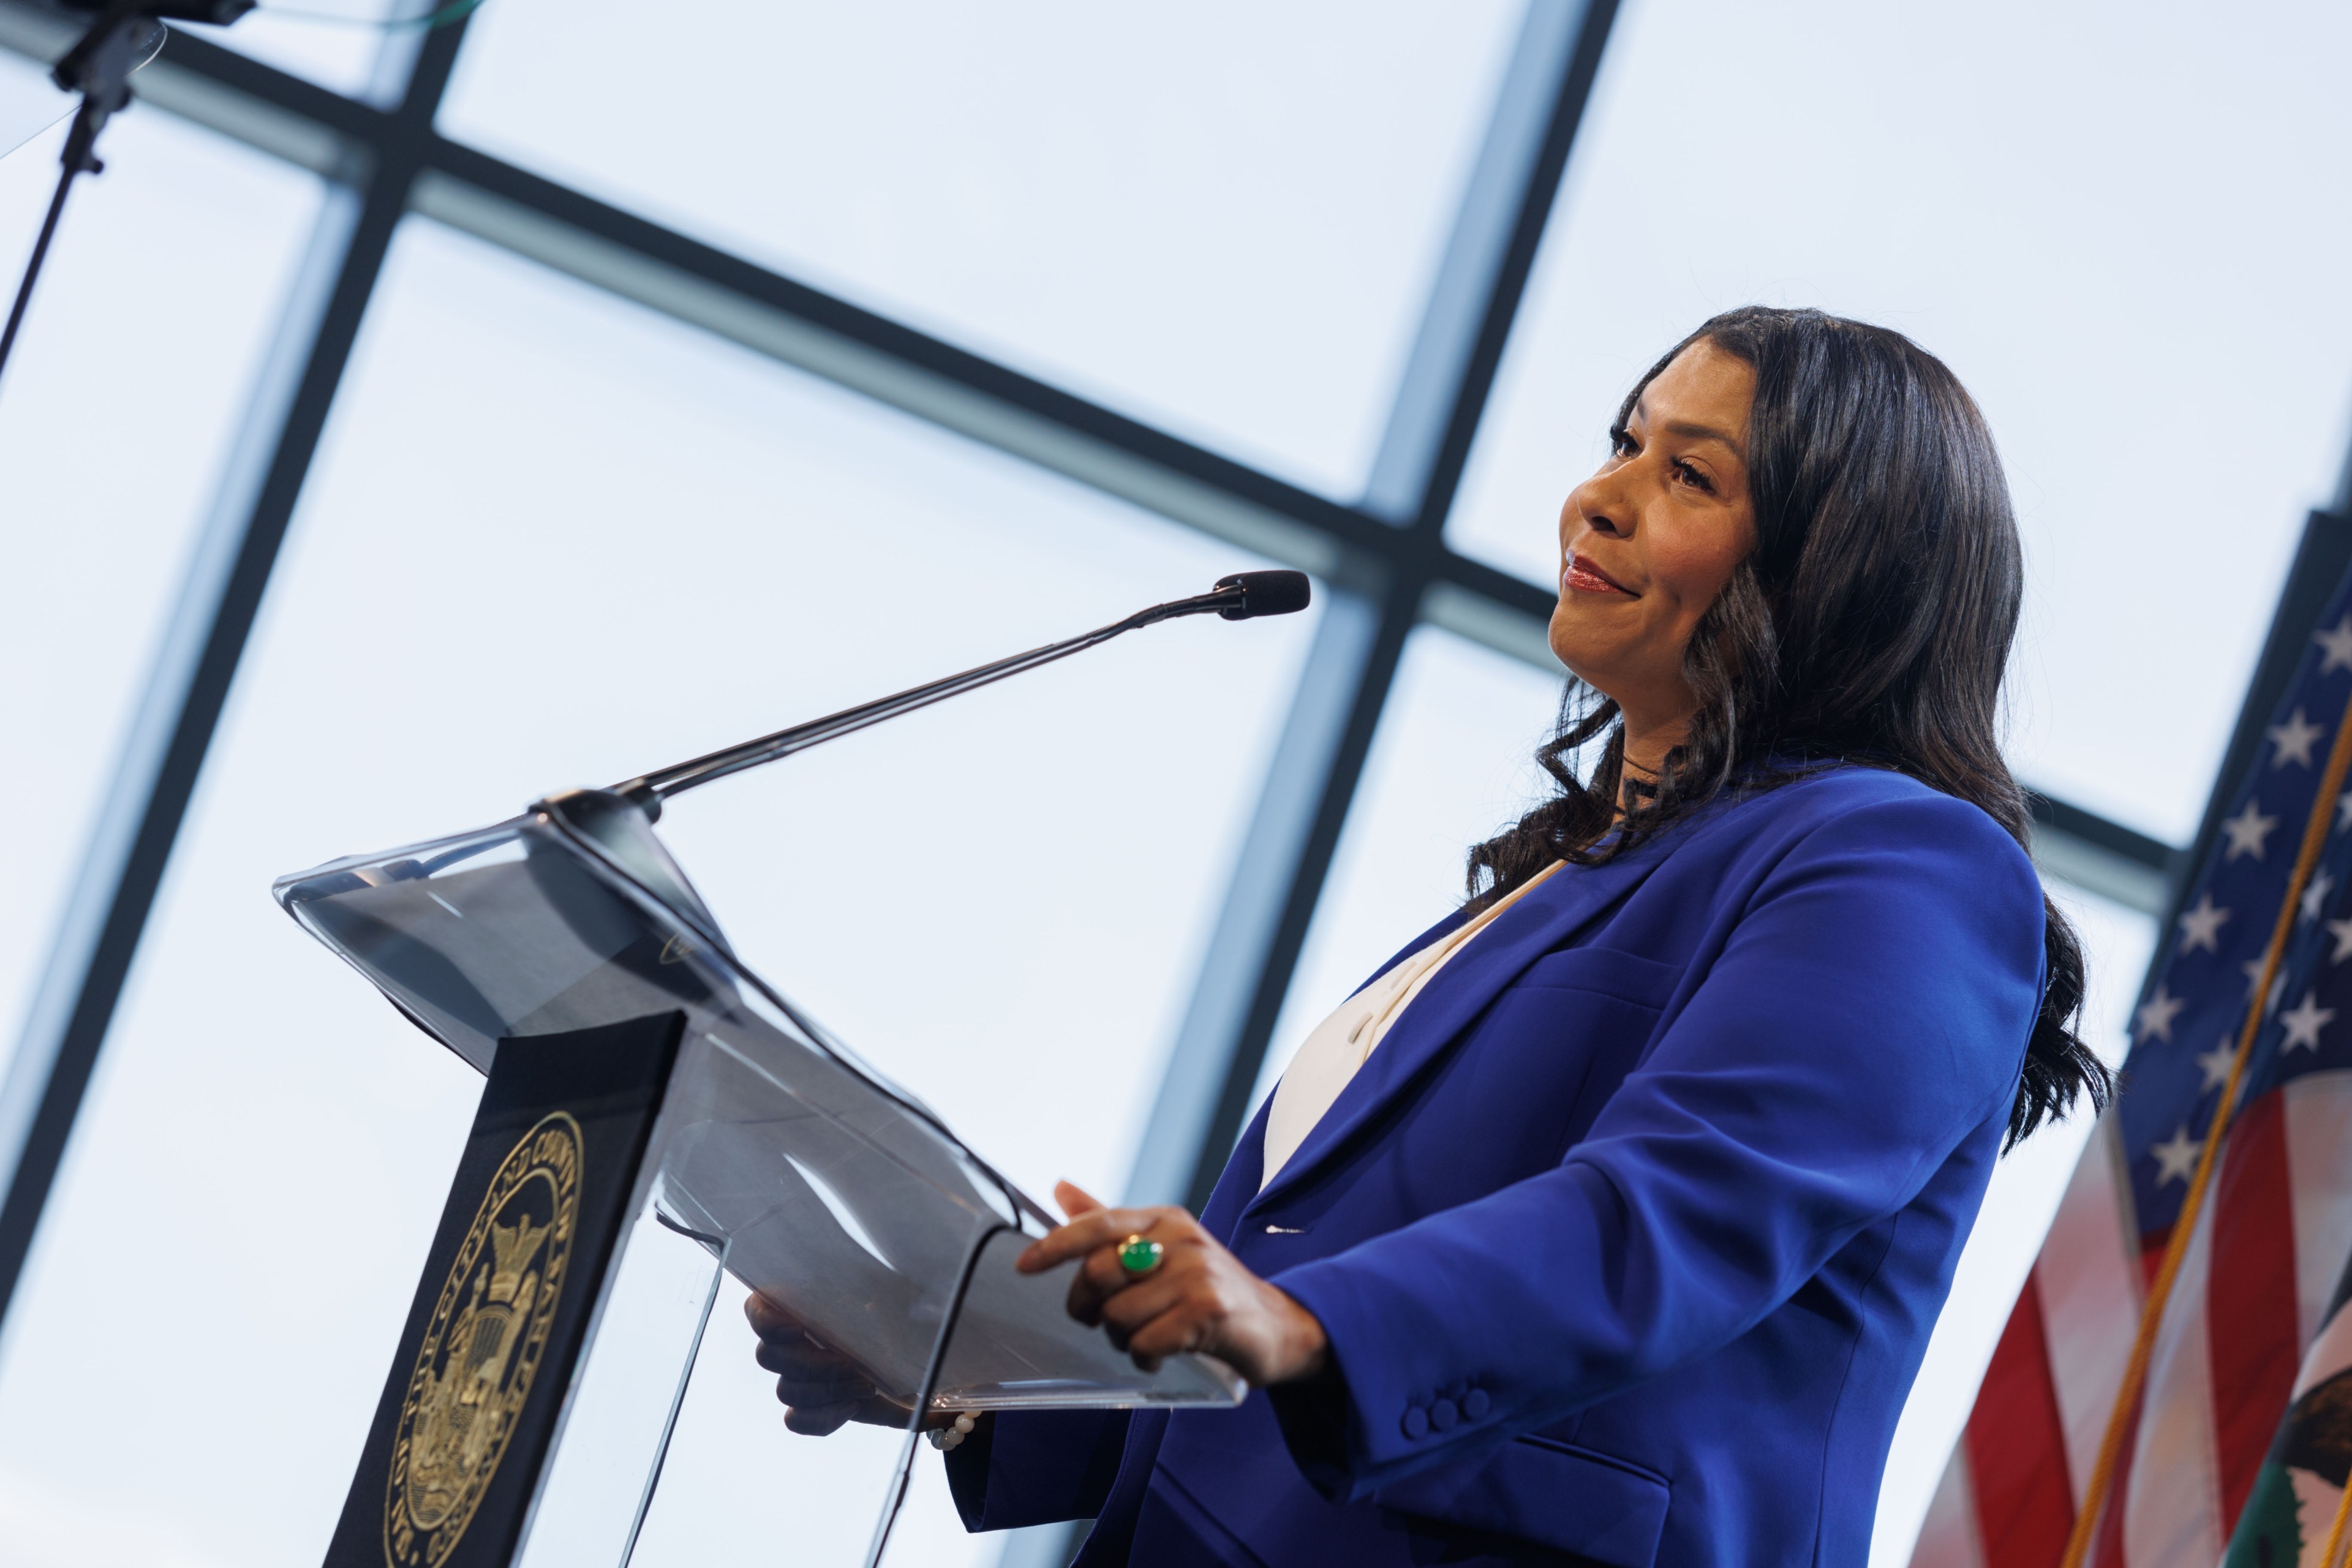 Mayor London Breed in a blue blazer speaks at a podium with a mic, behind her is a window and U.S. flags.